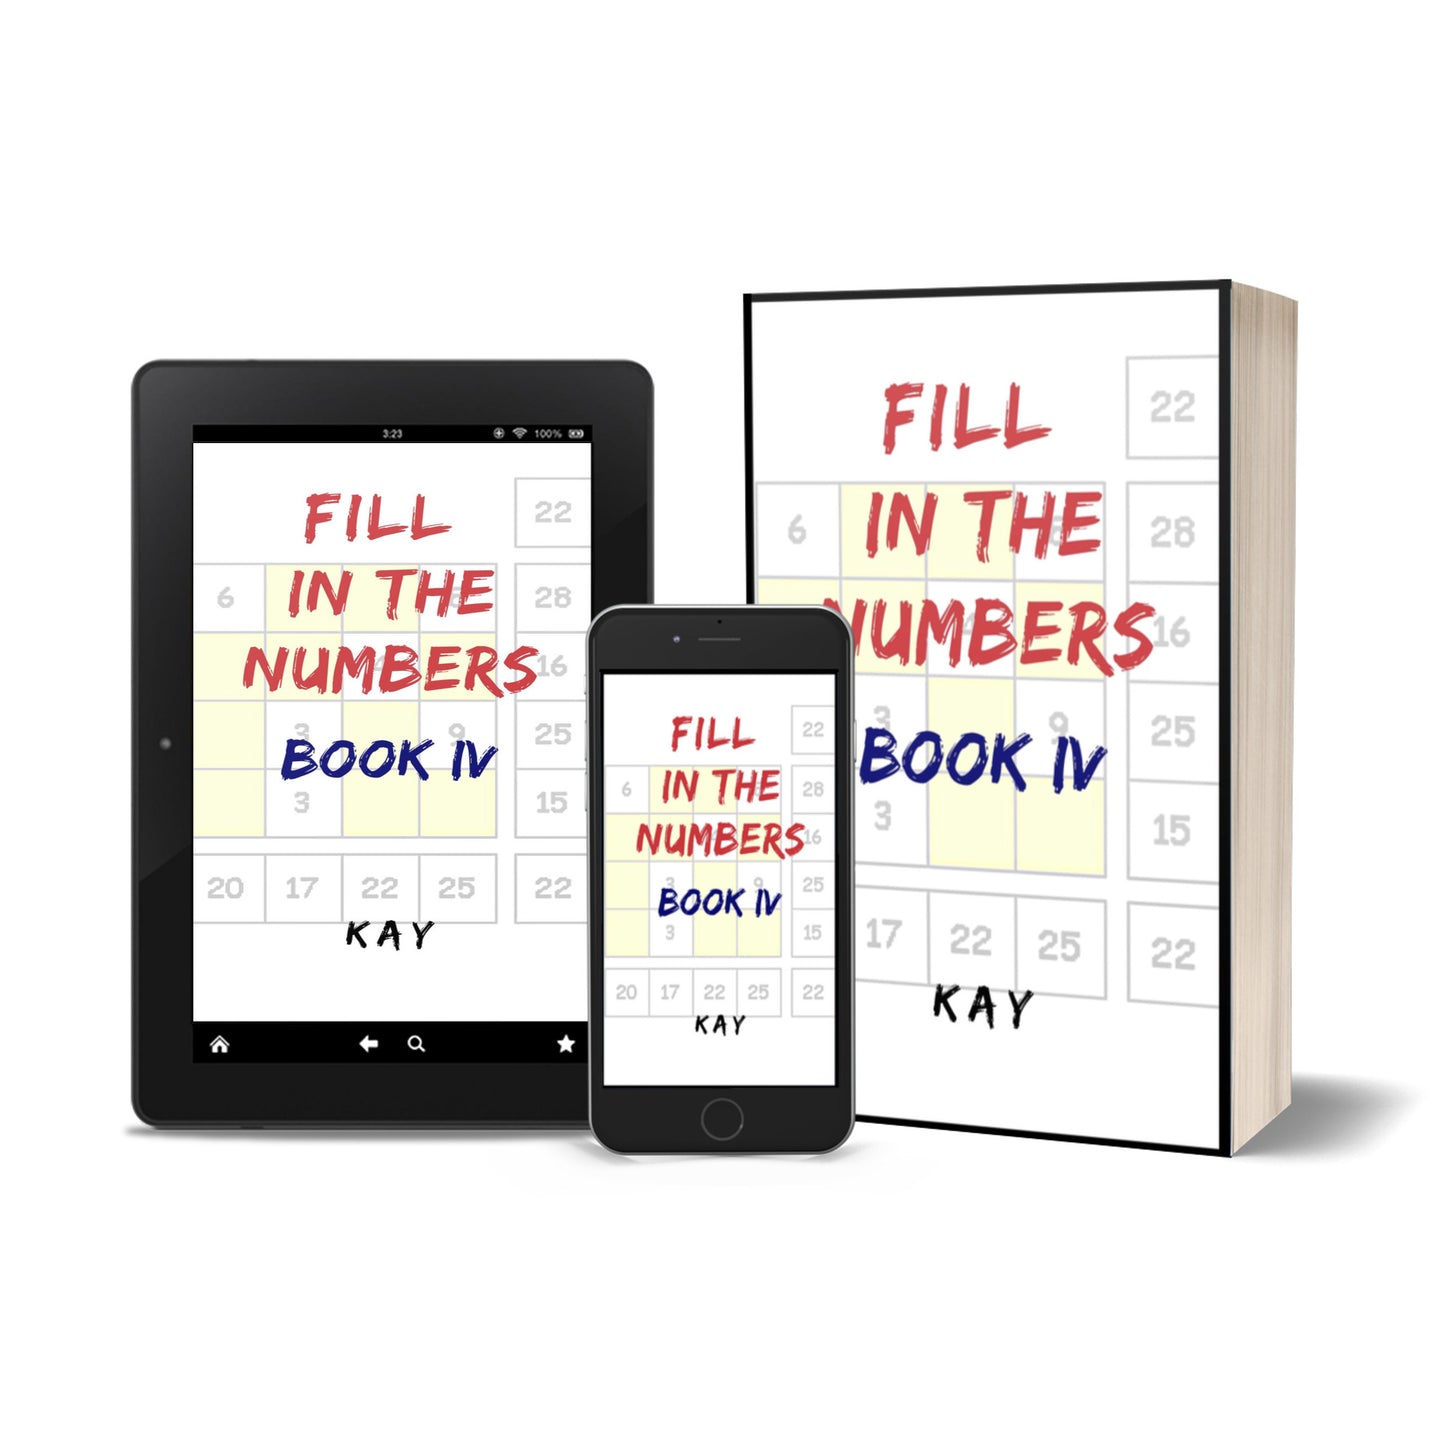 Fill in the Numbers Book IV Digital Download